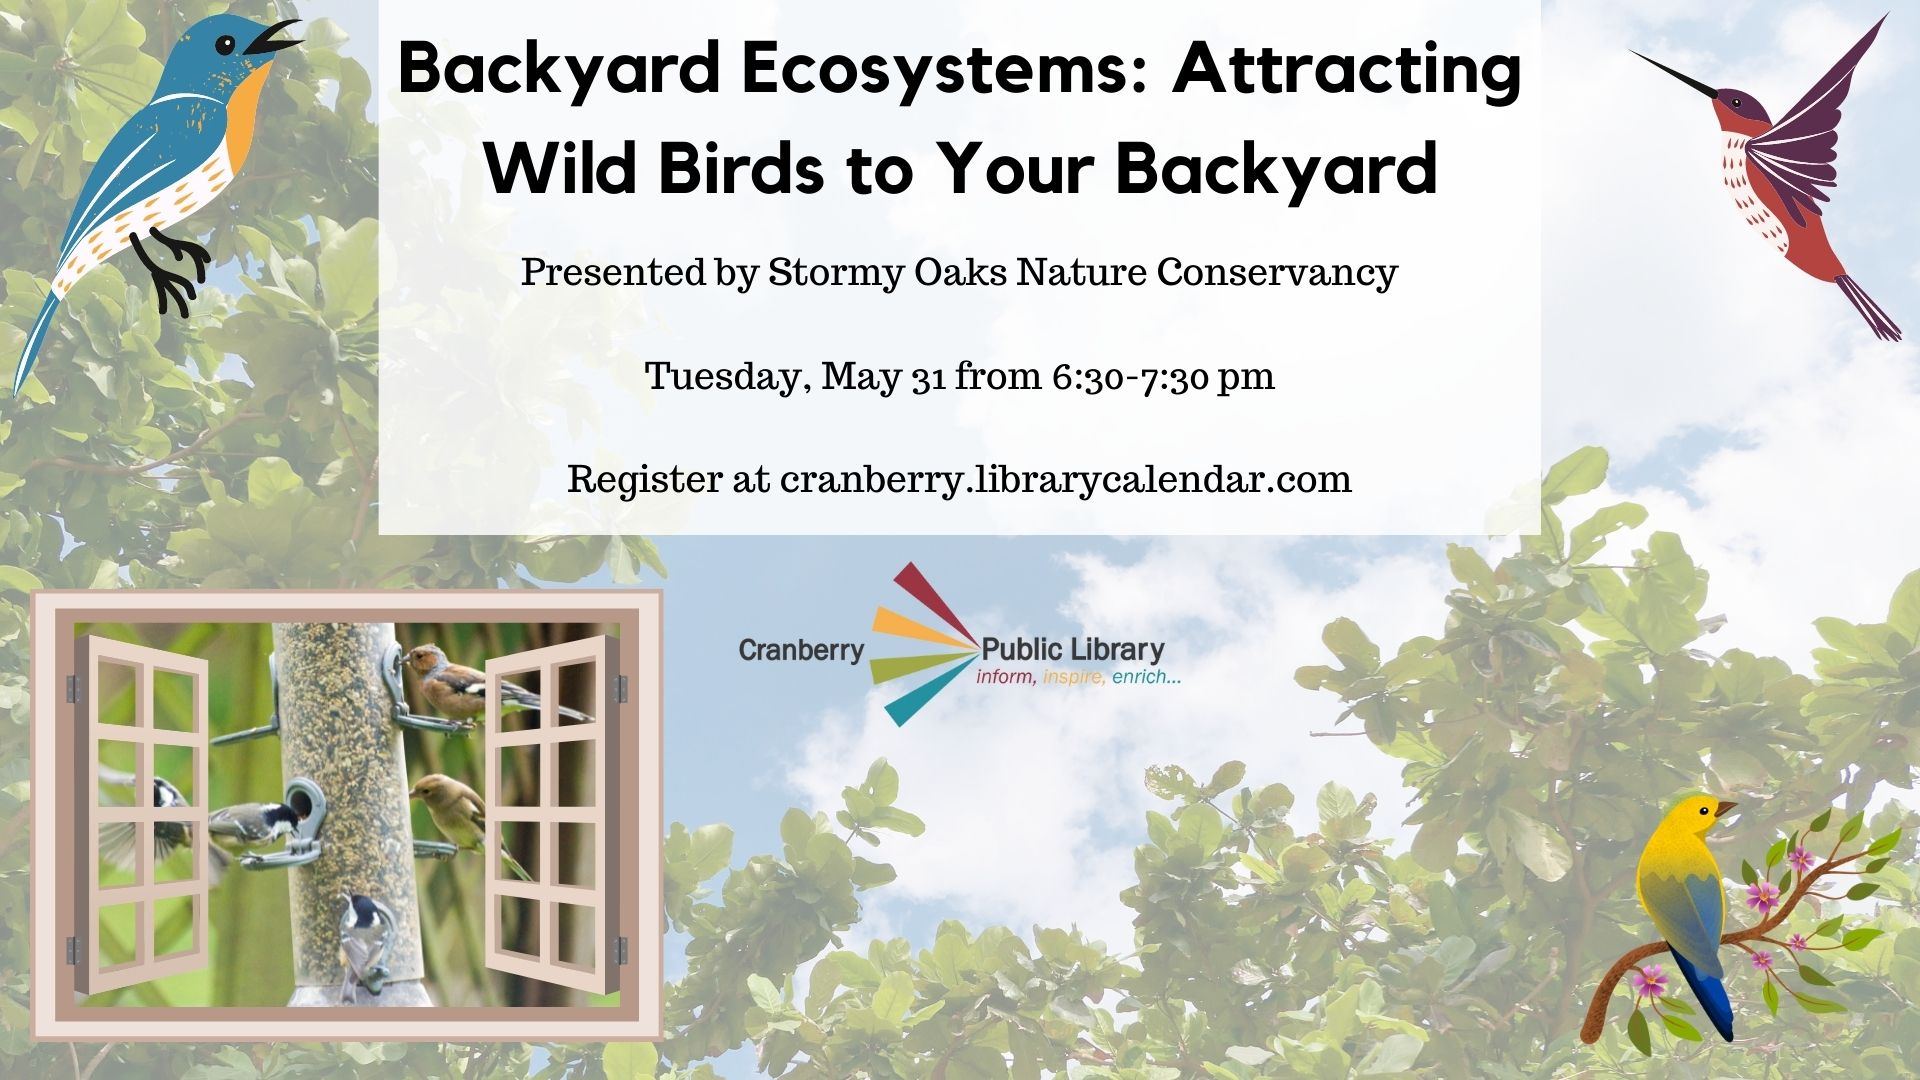 Flyer for Backyard Ecosystems program with colorful birds